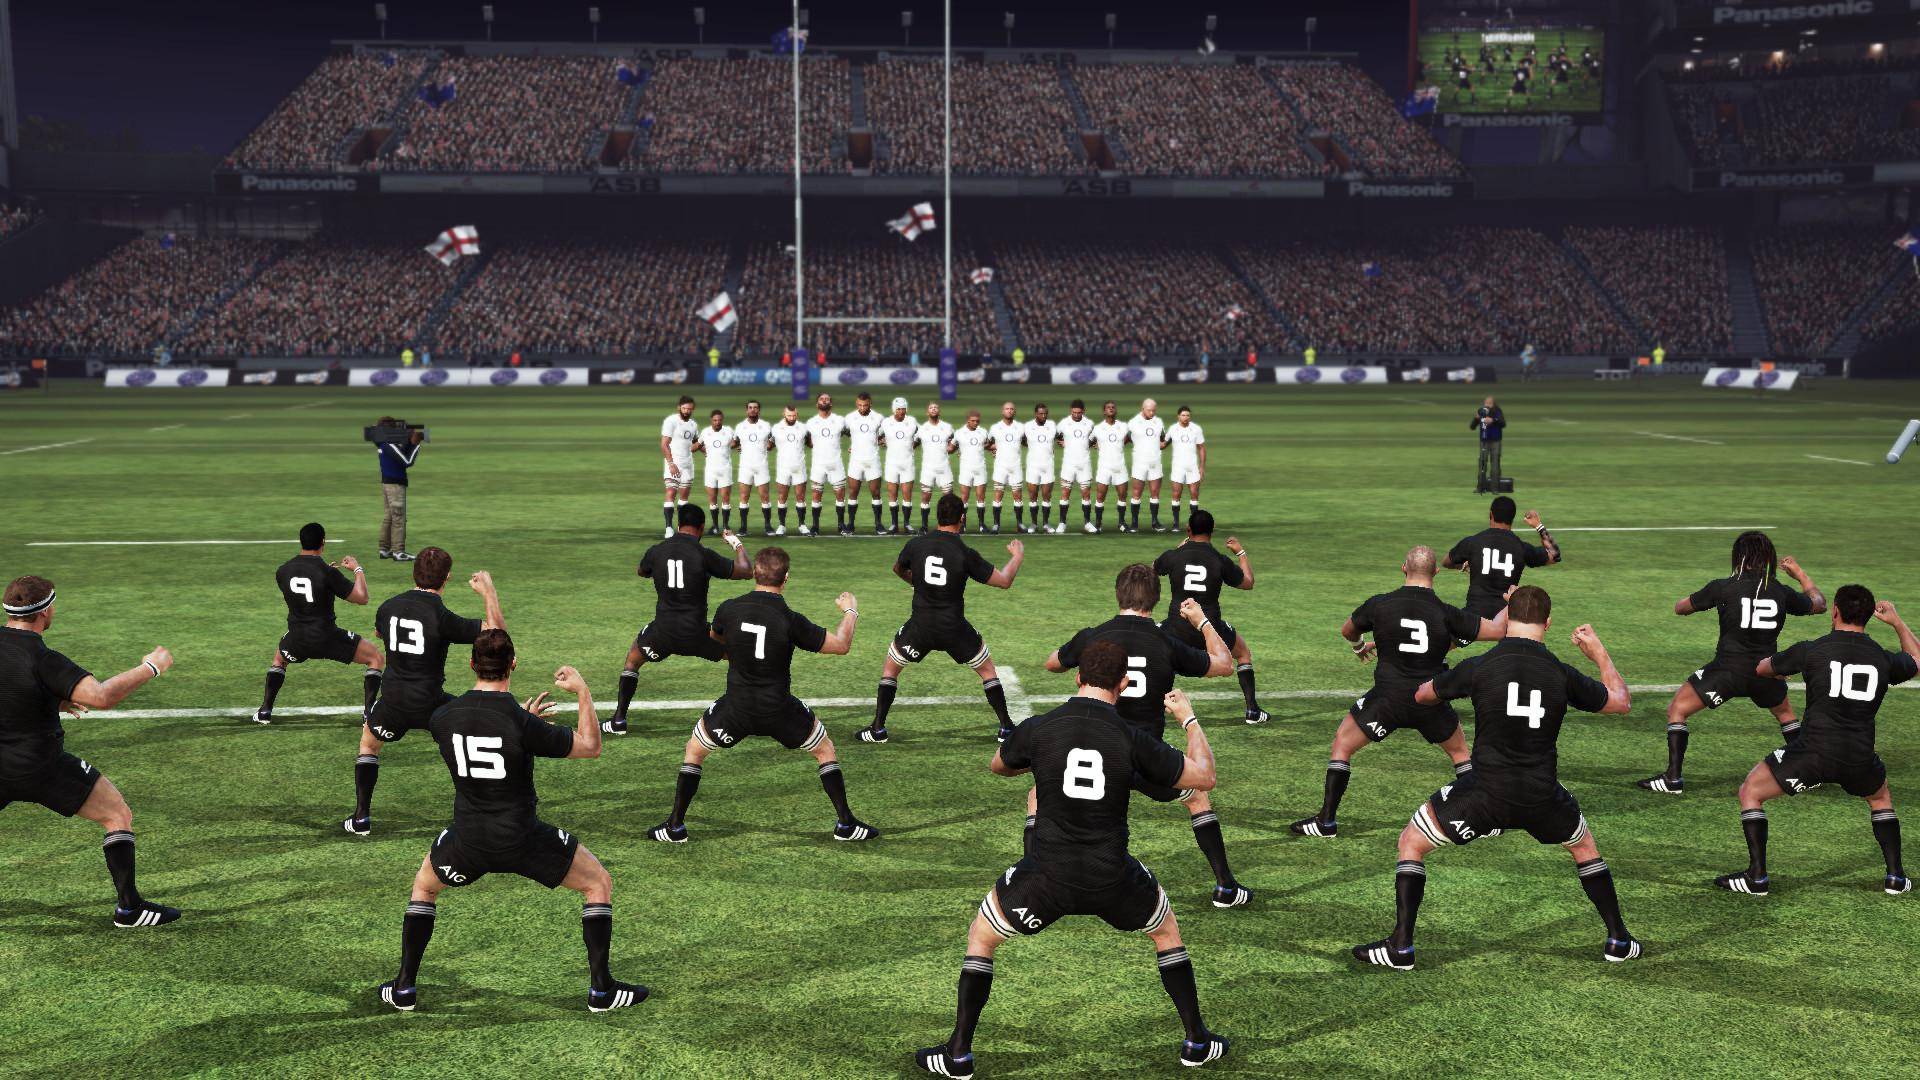 Rugby Challenge 3 (PC) Key cheap Price of for Steam